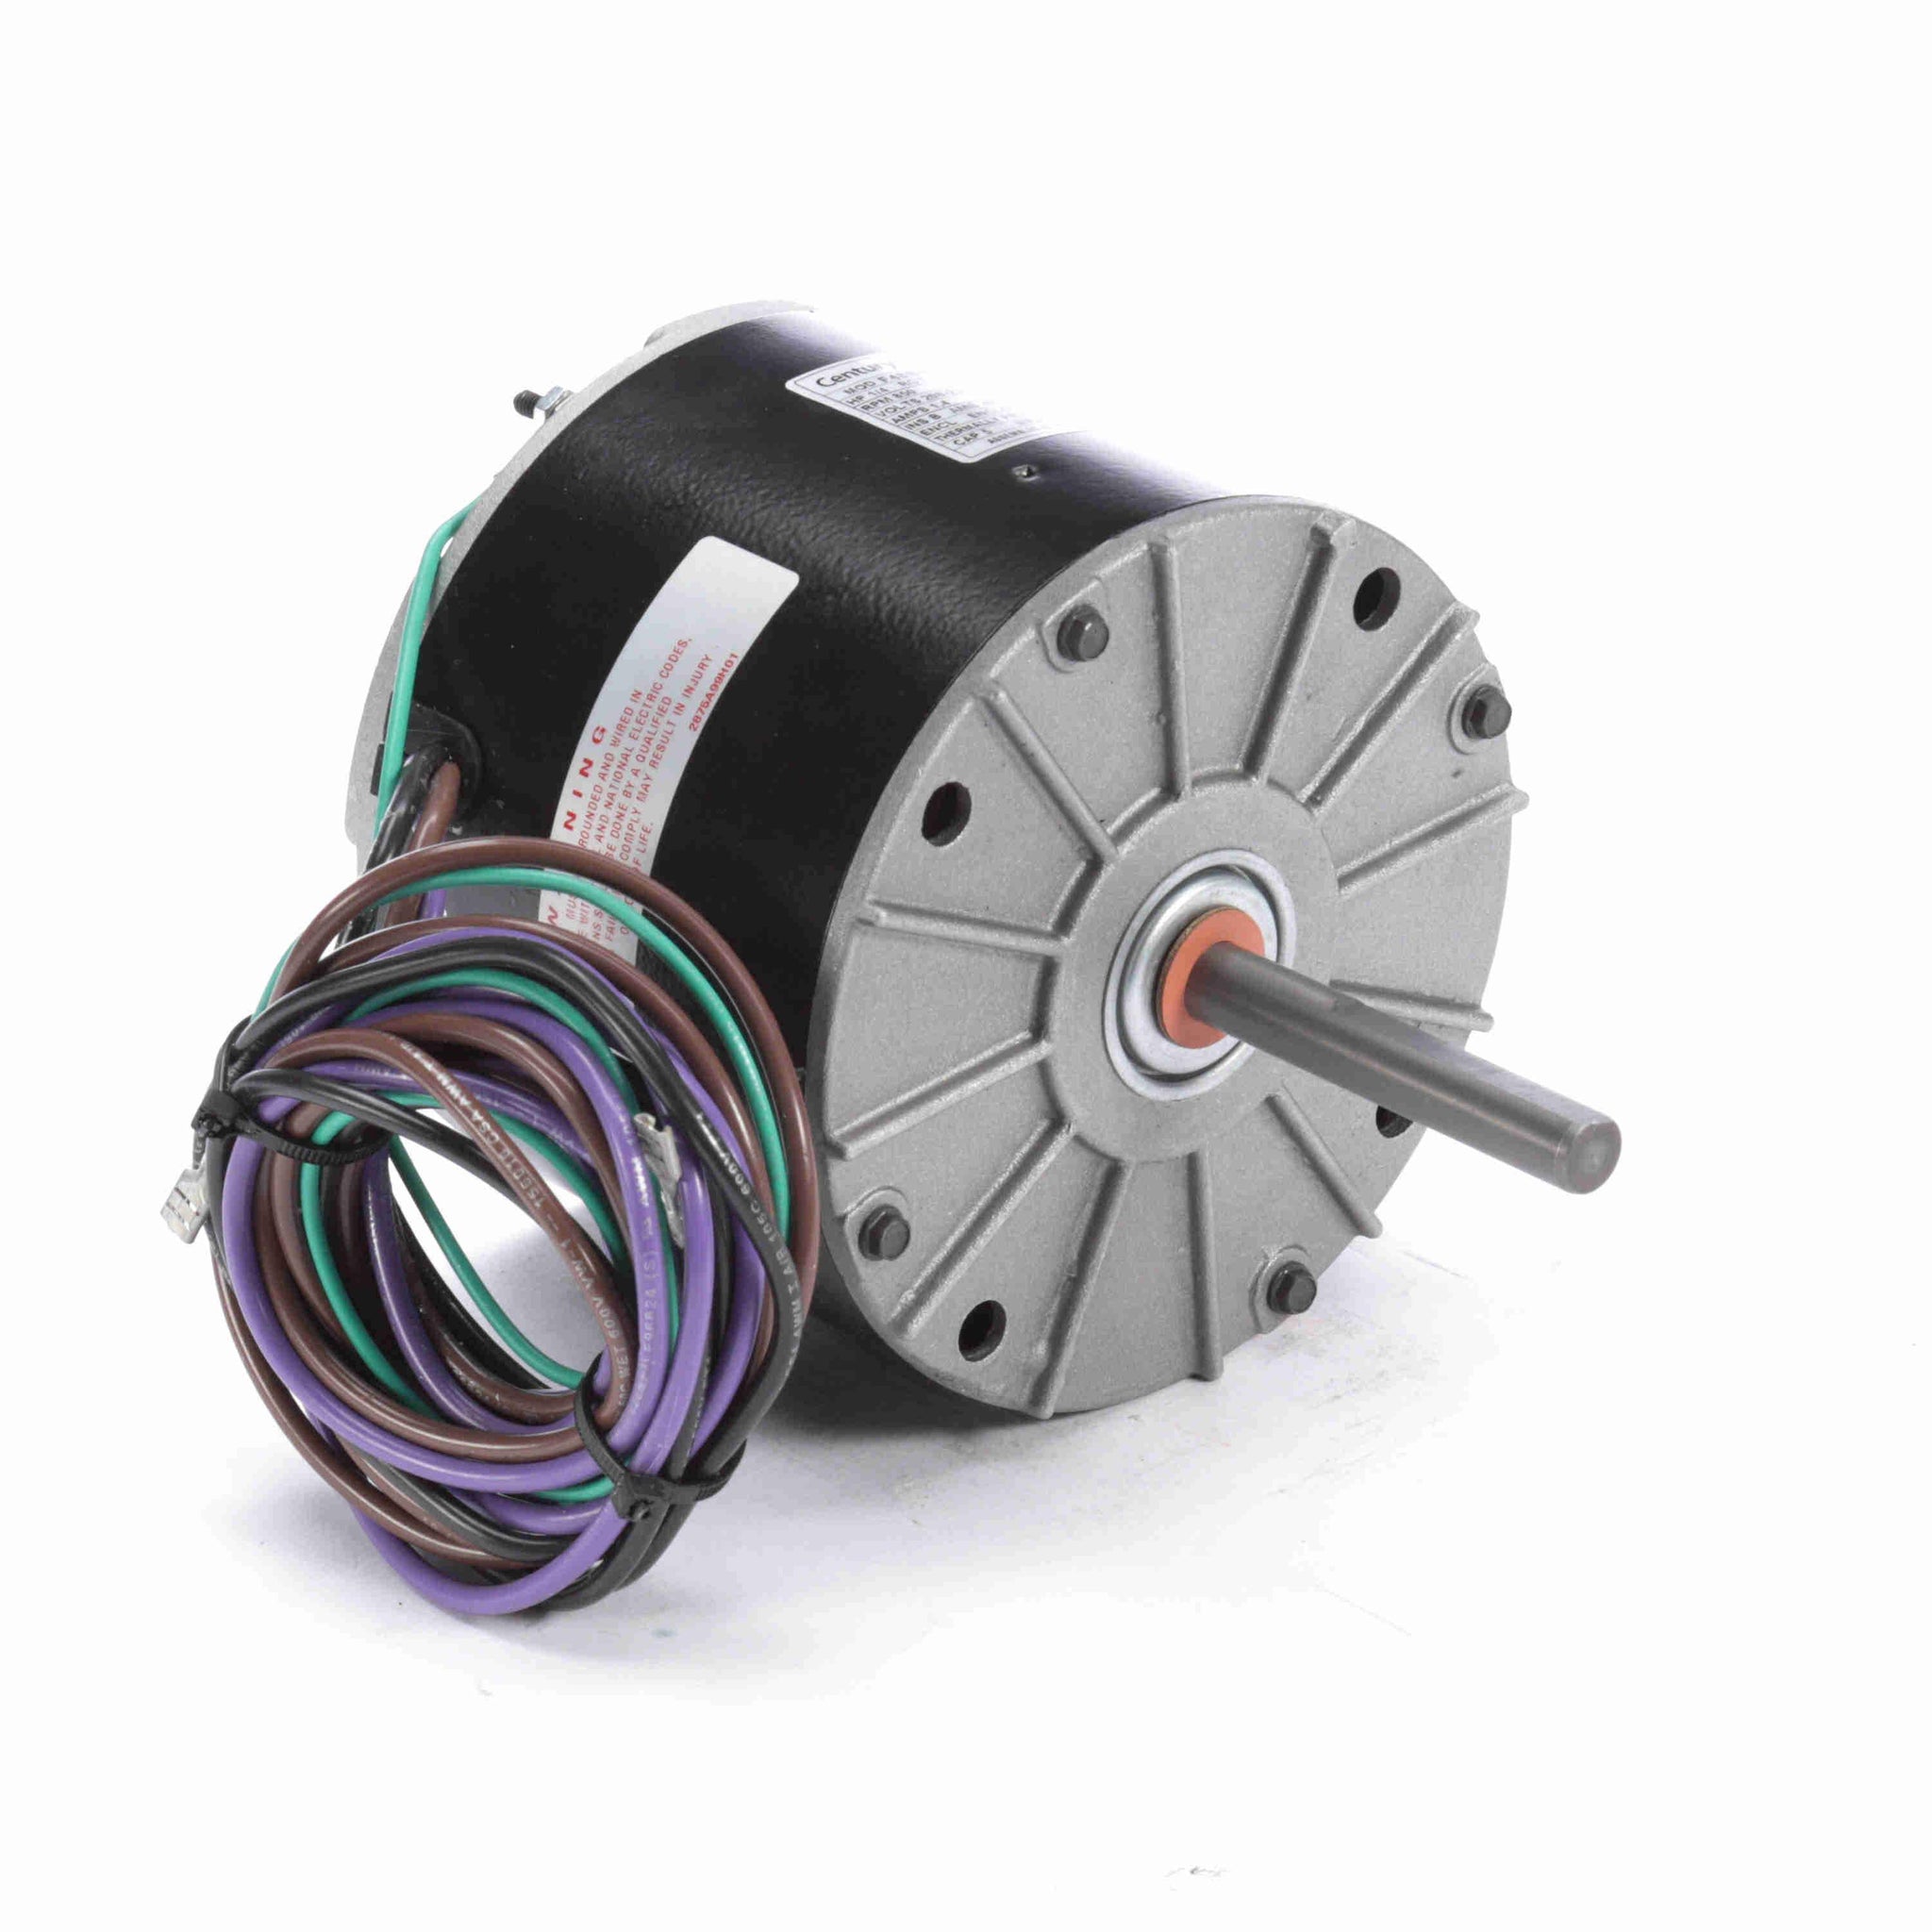 OYK1028 - 1/4 HP OEM Replacement Motor, 850 RPM, 208-230 Volts, 48 Frame, TEAO - Hardware & Moreee